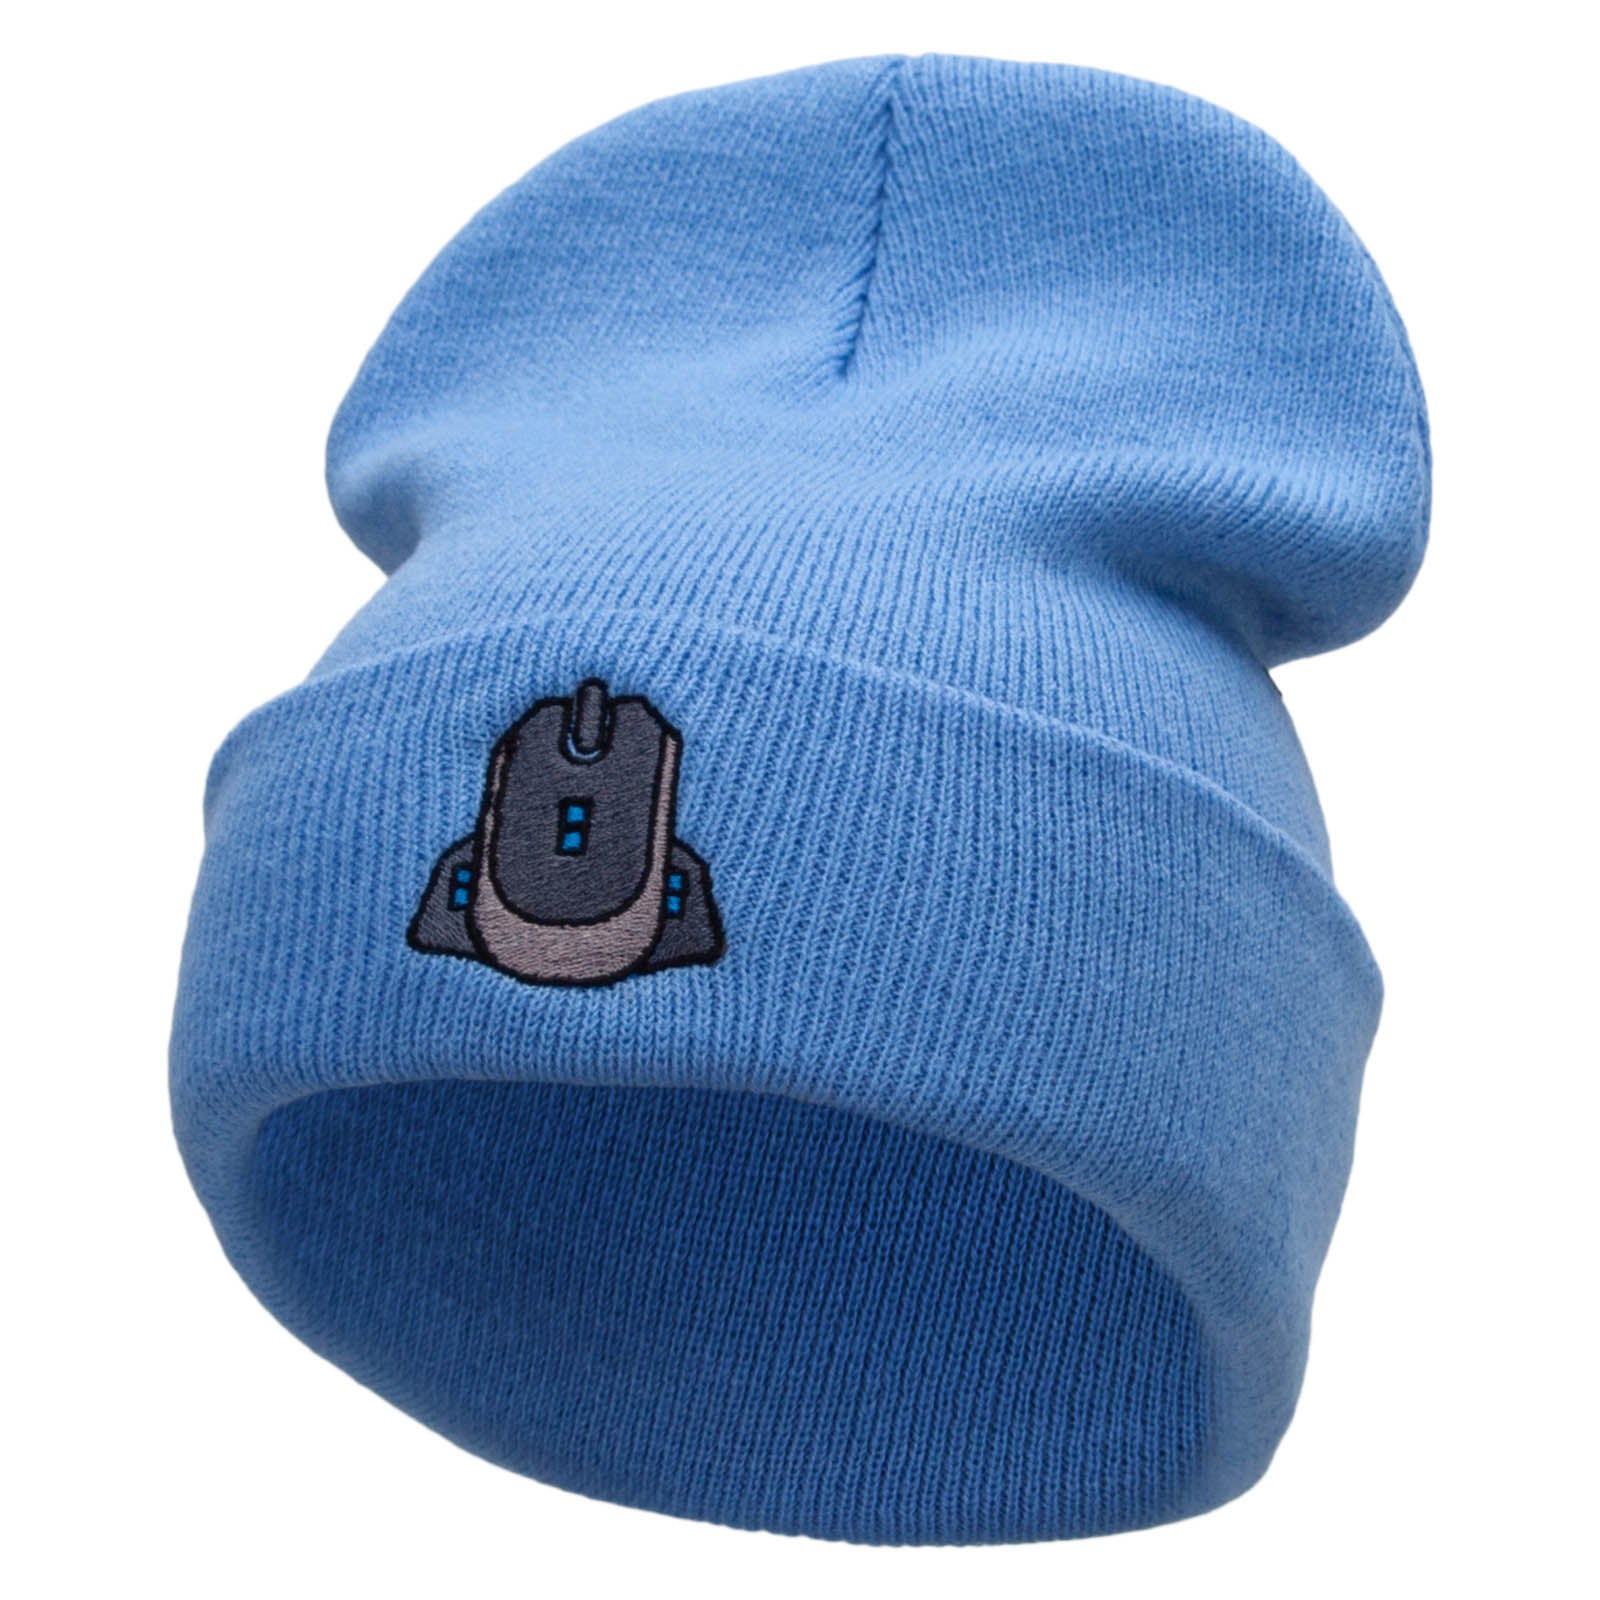 Gamer Mouse Embroidered 12 Inch Long Knitted Beanie - Sky Blue OSFM